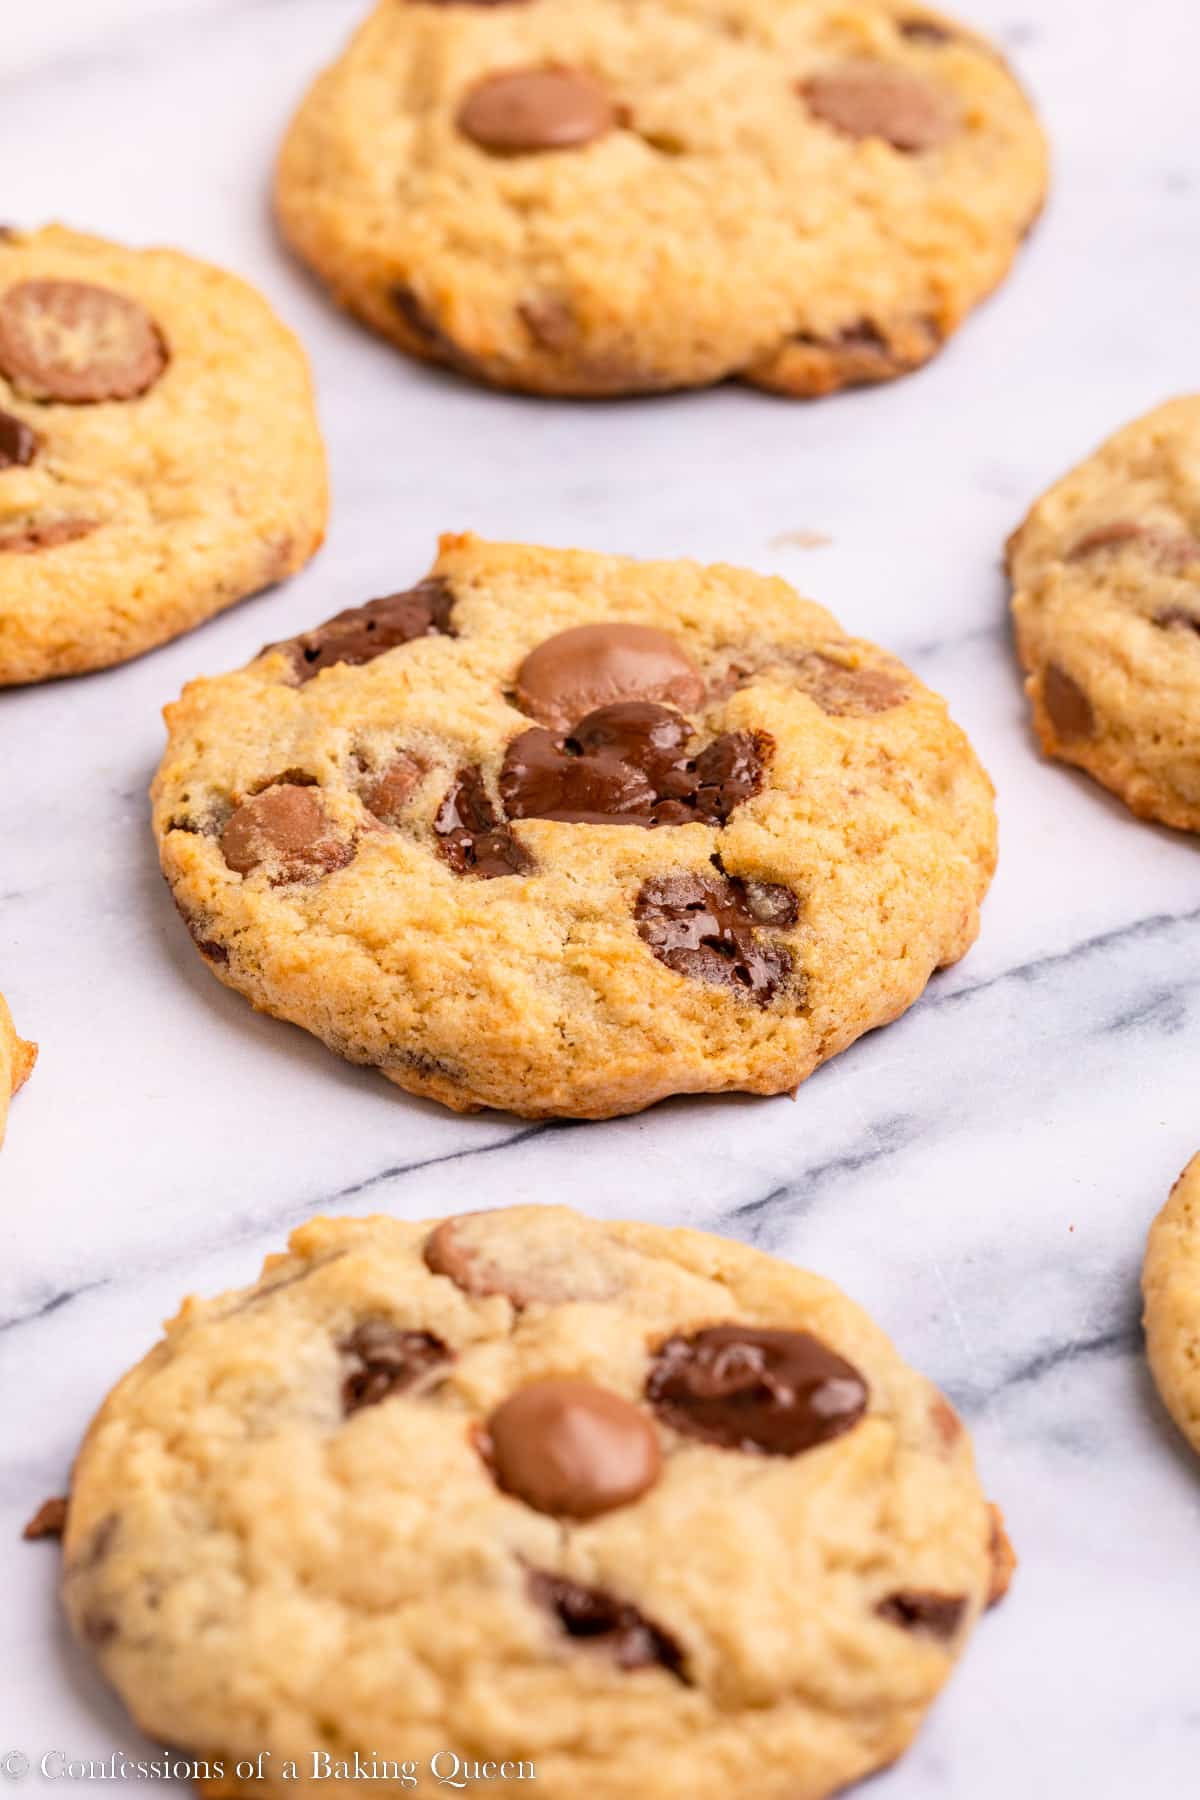 Banana chocolate chip cookies on a counter.